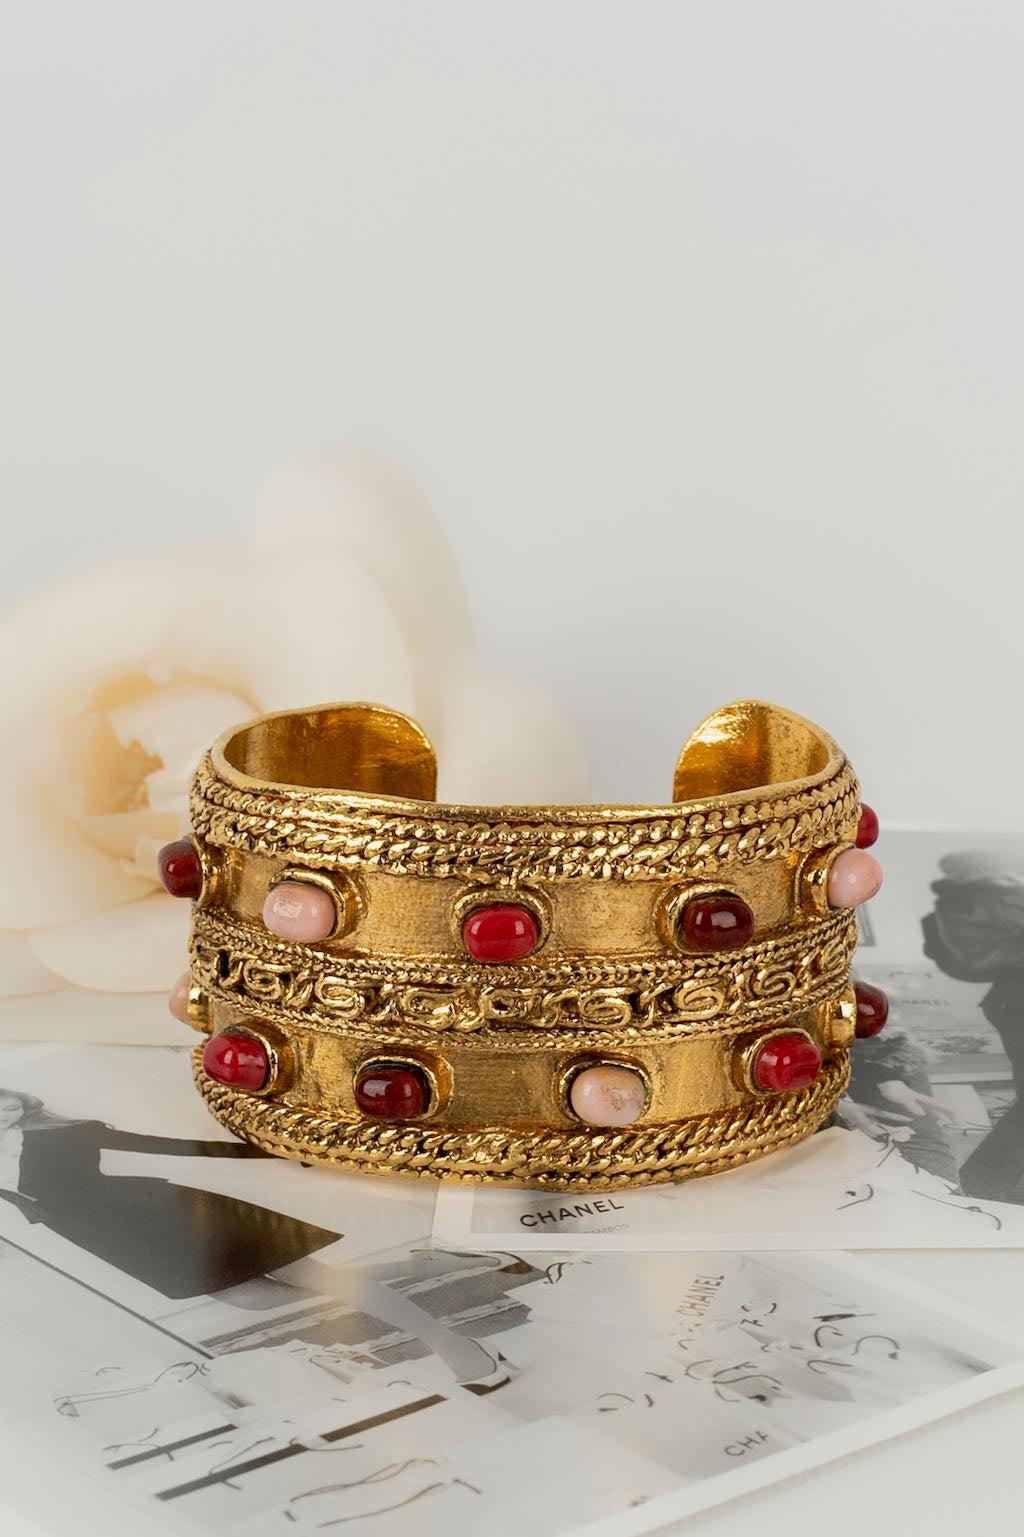 Chanel -(Made in France) Gold metal cuff bracelet paved with glass paste cabochons. Jewel dating from the 1980s.

Additional information:

Dimensions: 
Circumference: 16 cm 
Opening: 3 cm 
Width: 4.5 cm

Condition: Very good condition
Seller Ref